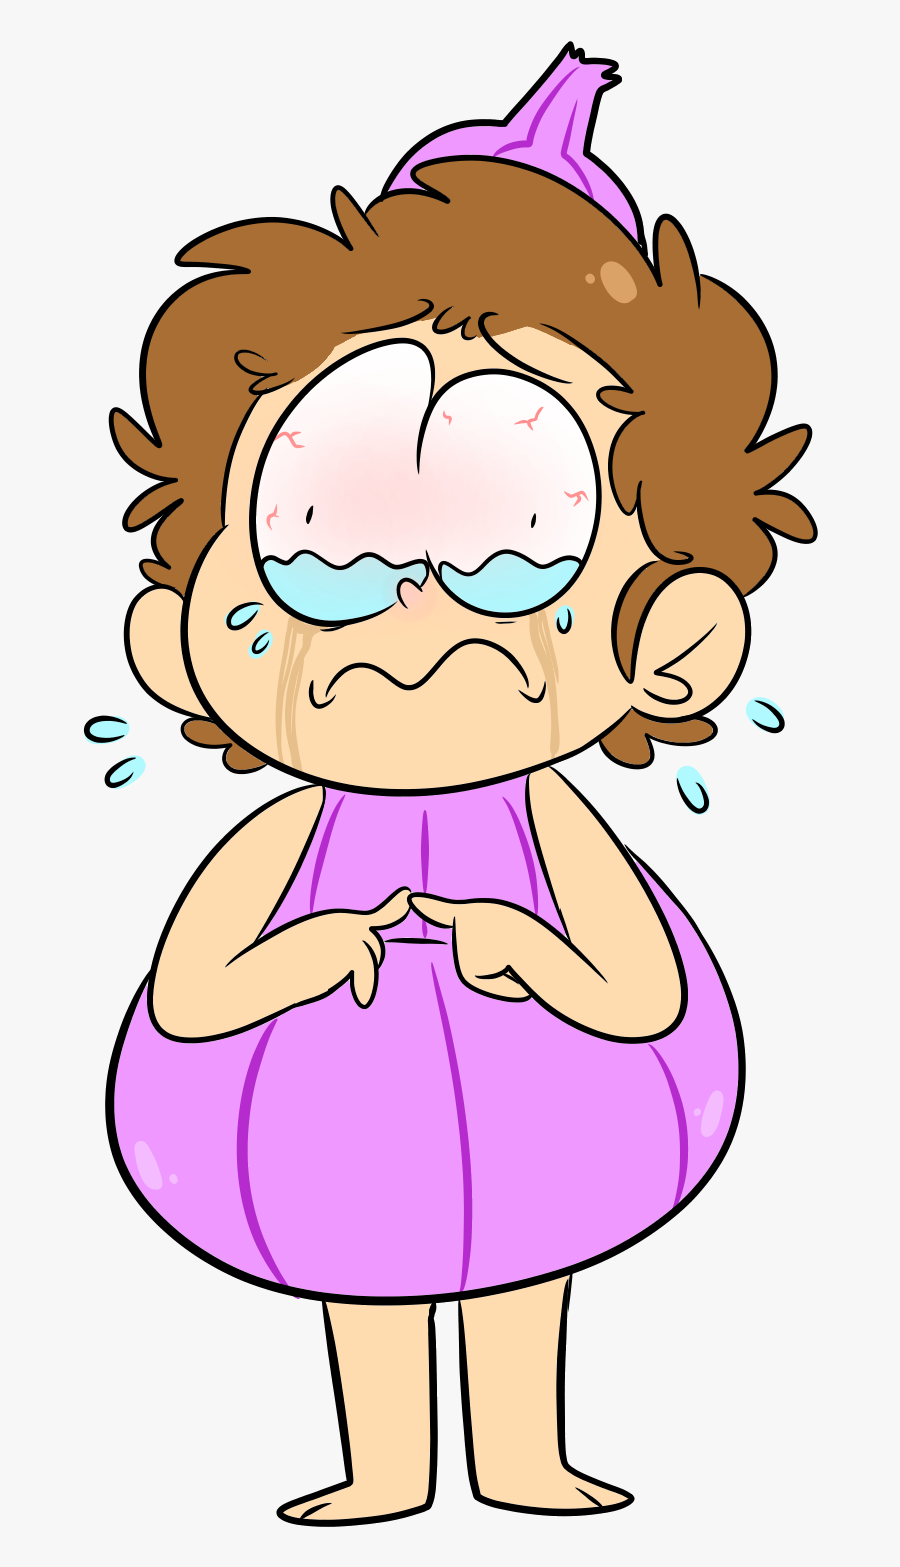 This Morty Was The Result Of An Accidental Experiment - Cartoon, Transparent Clipart